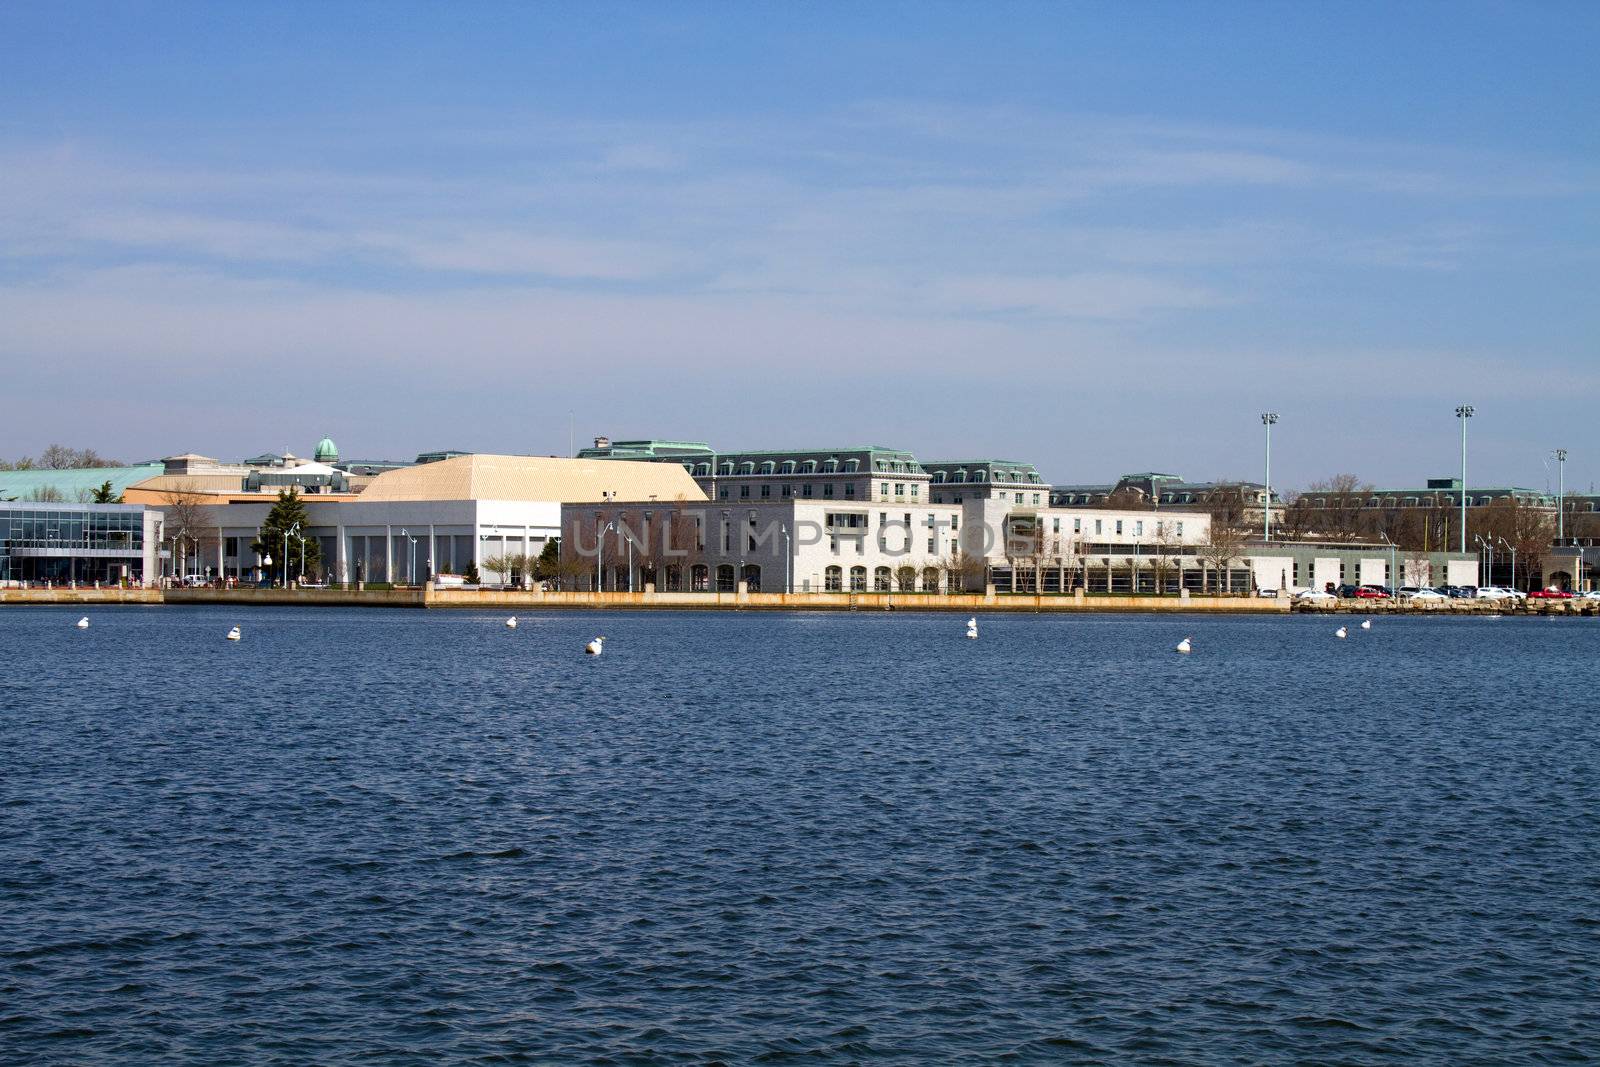 Skyline of the campus of the United States Naval Academy located in Annapolis, Maryland as seen from across the Severn River.